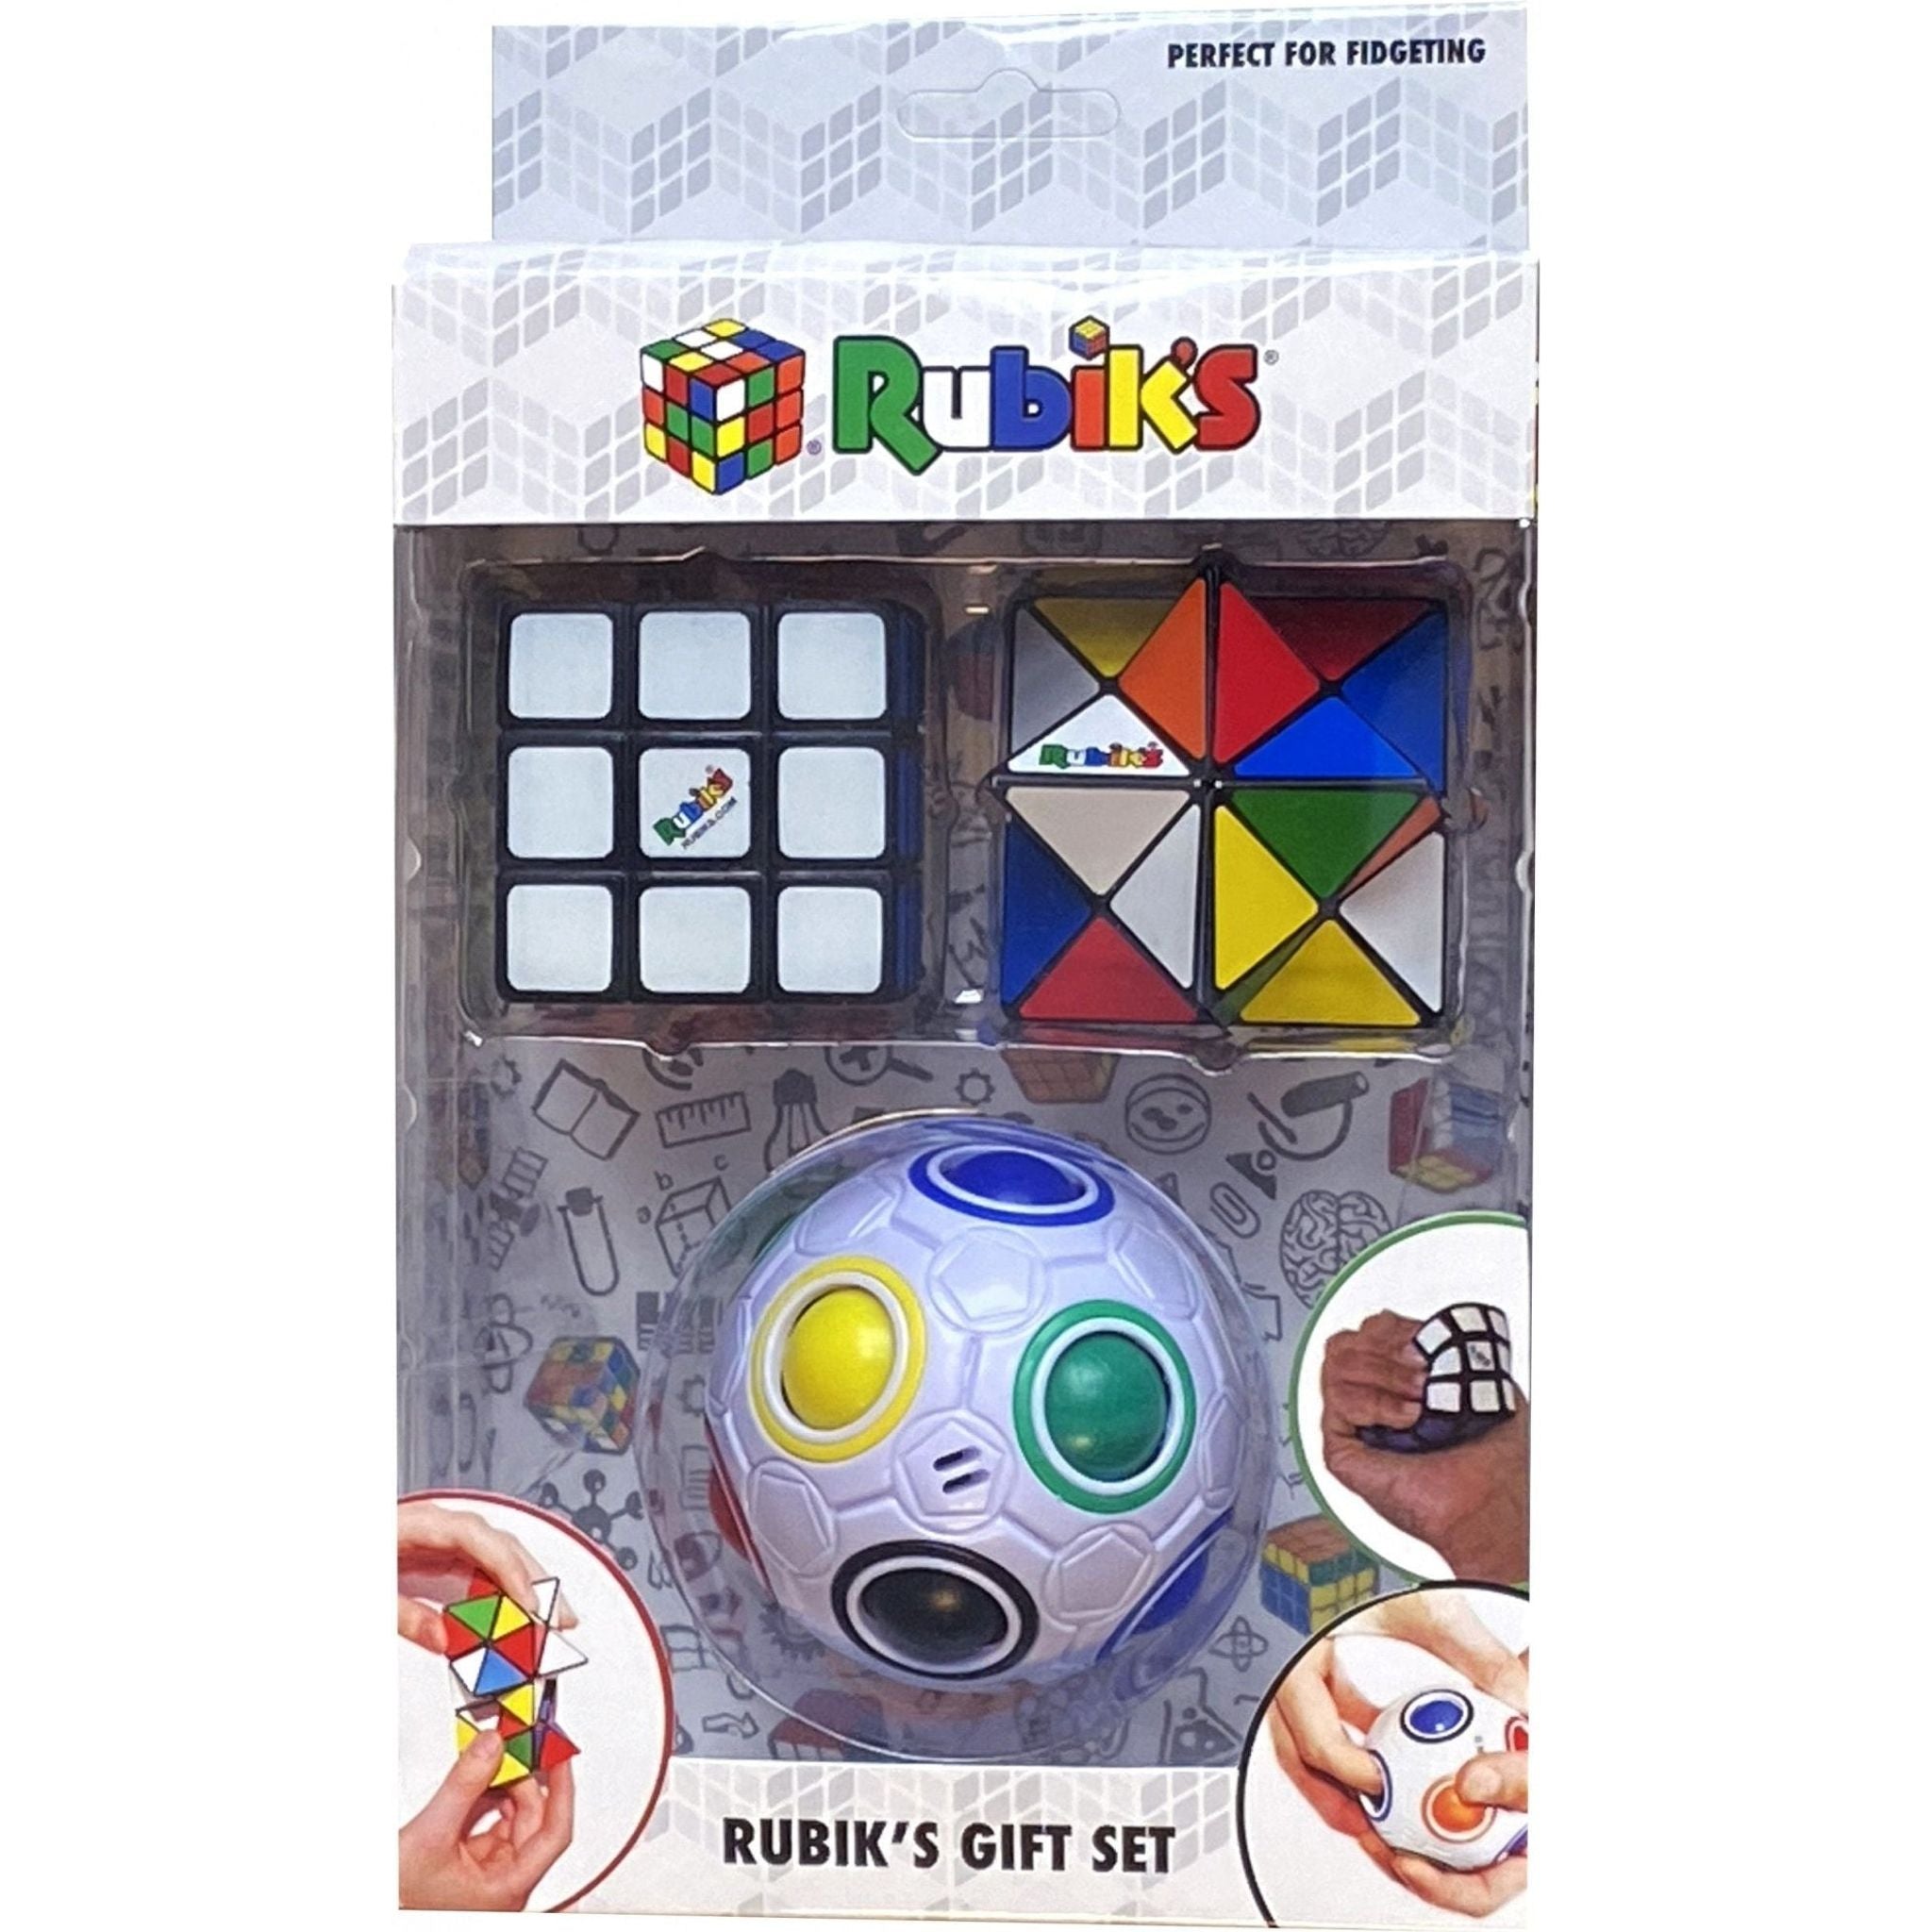 Rubik's Gift Set (Includes Rainbow Ball, Squishy Cube and Magic Star) - Toybox Tales